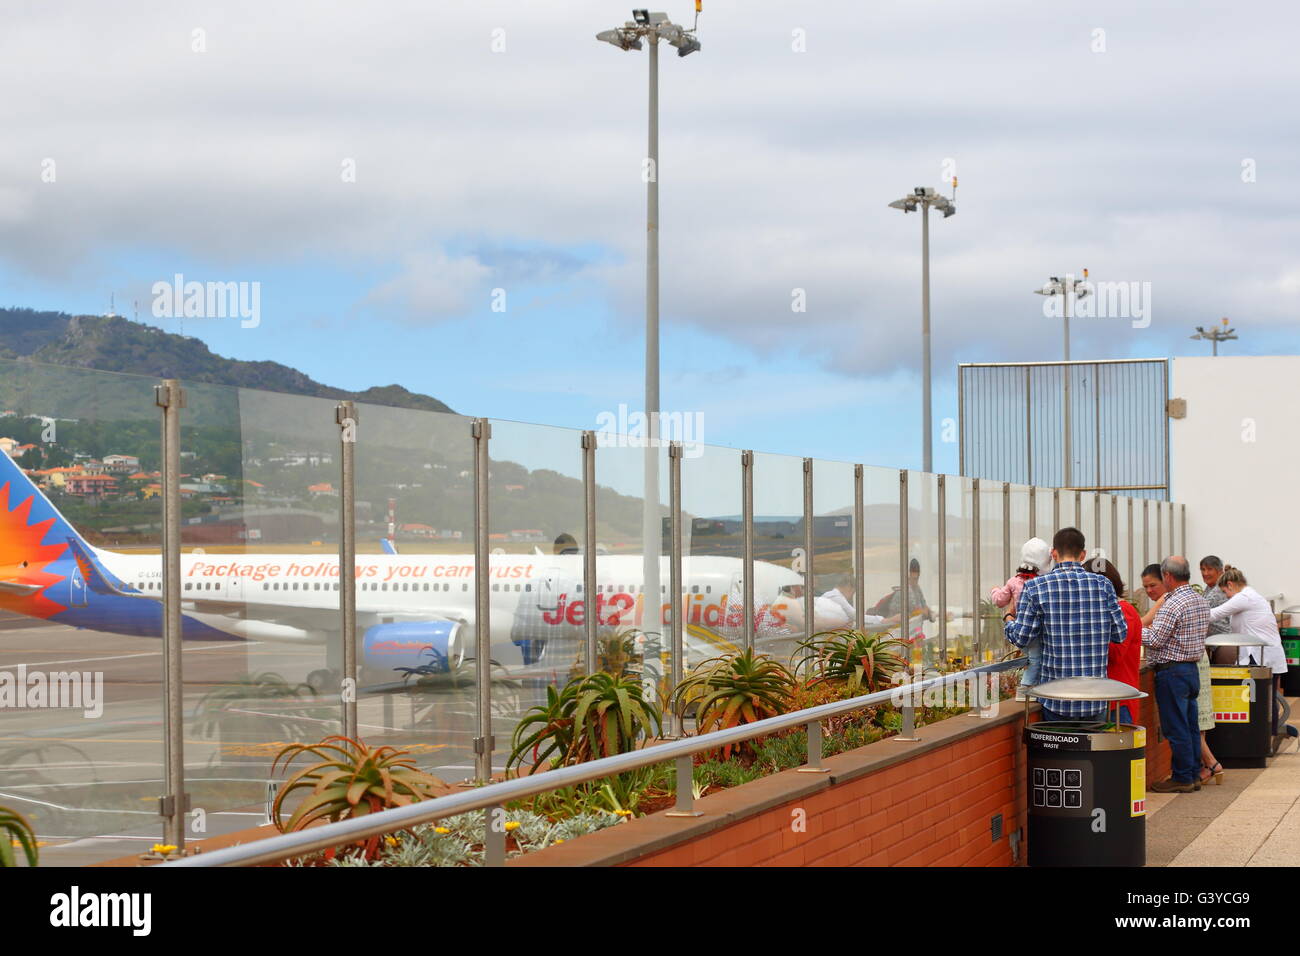 Spectators on the visitors' platform at the terminal at Funchal Airport, Madeira, Portugal Stock Photo